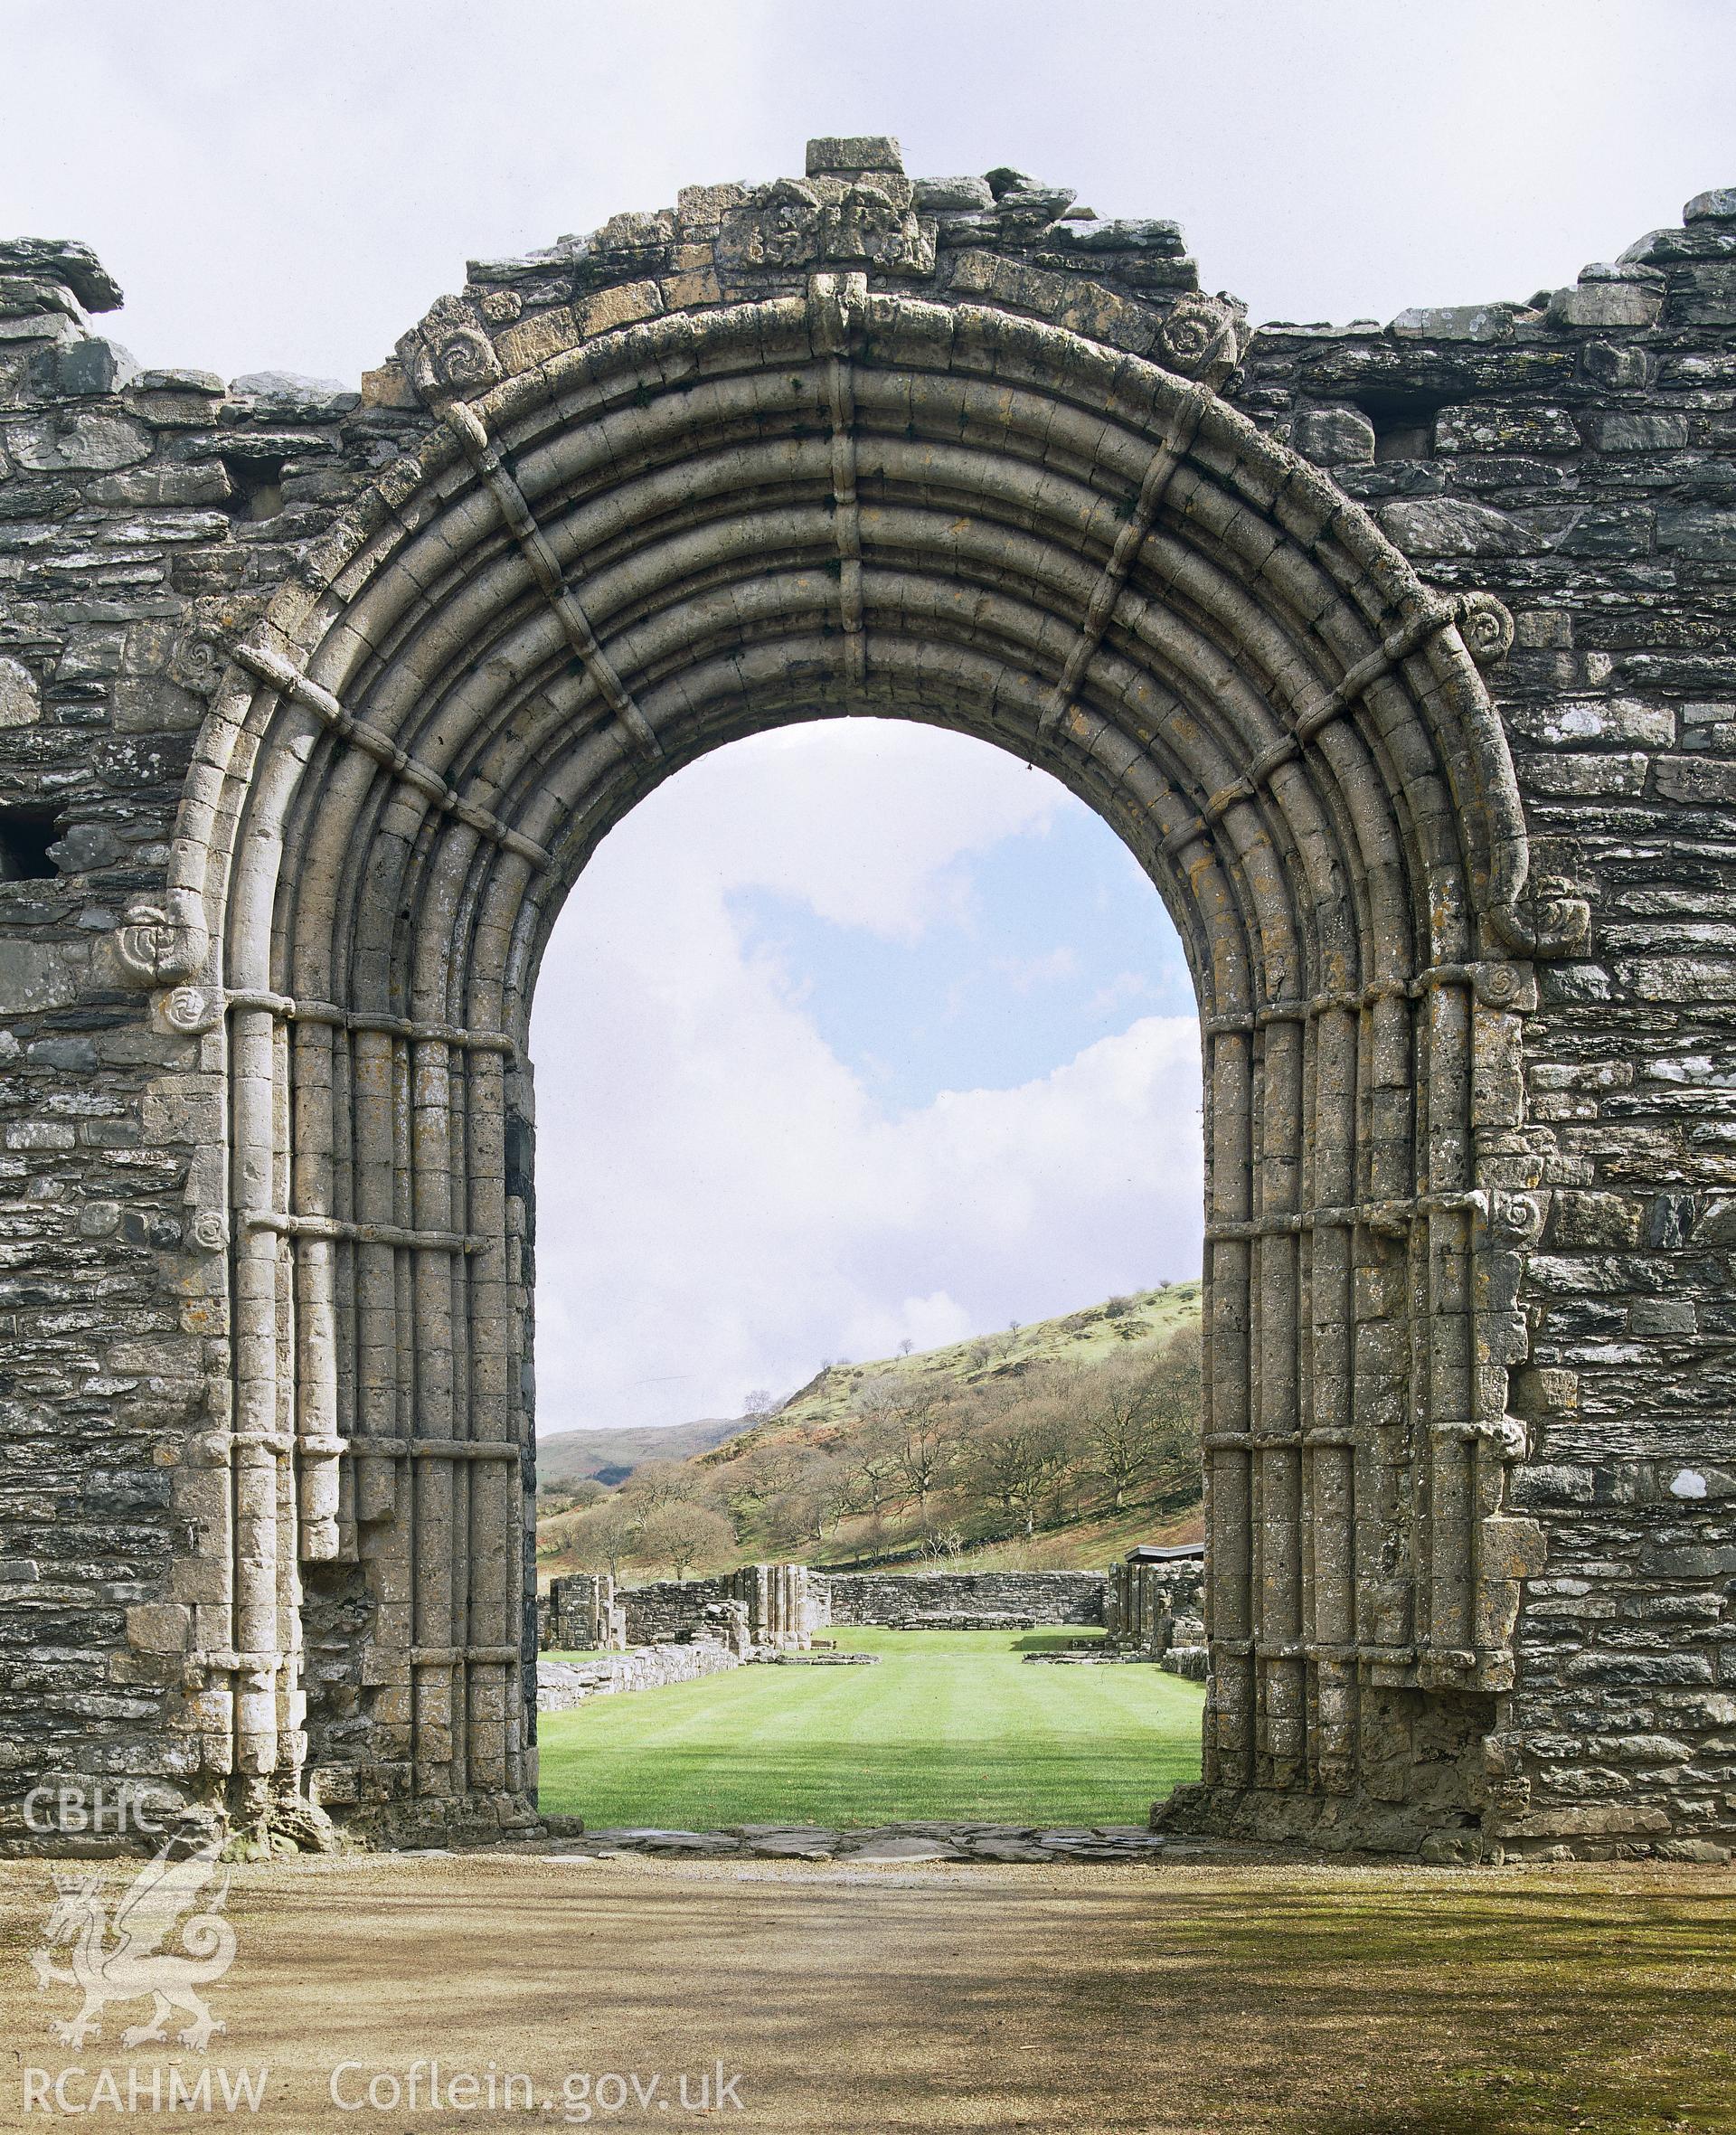 RCAHMW colour transparency showing view of Strata Florida Abbey